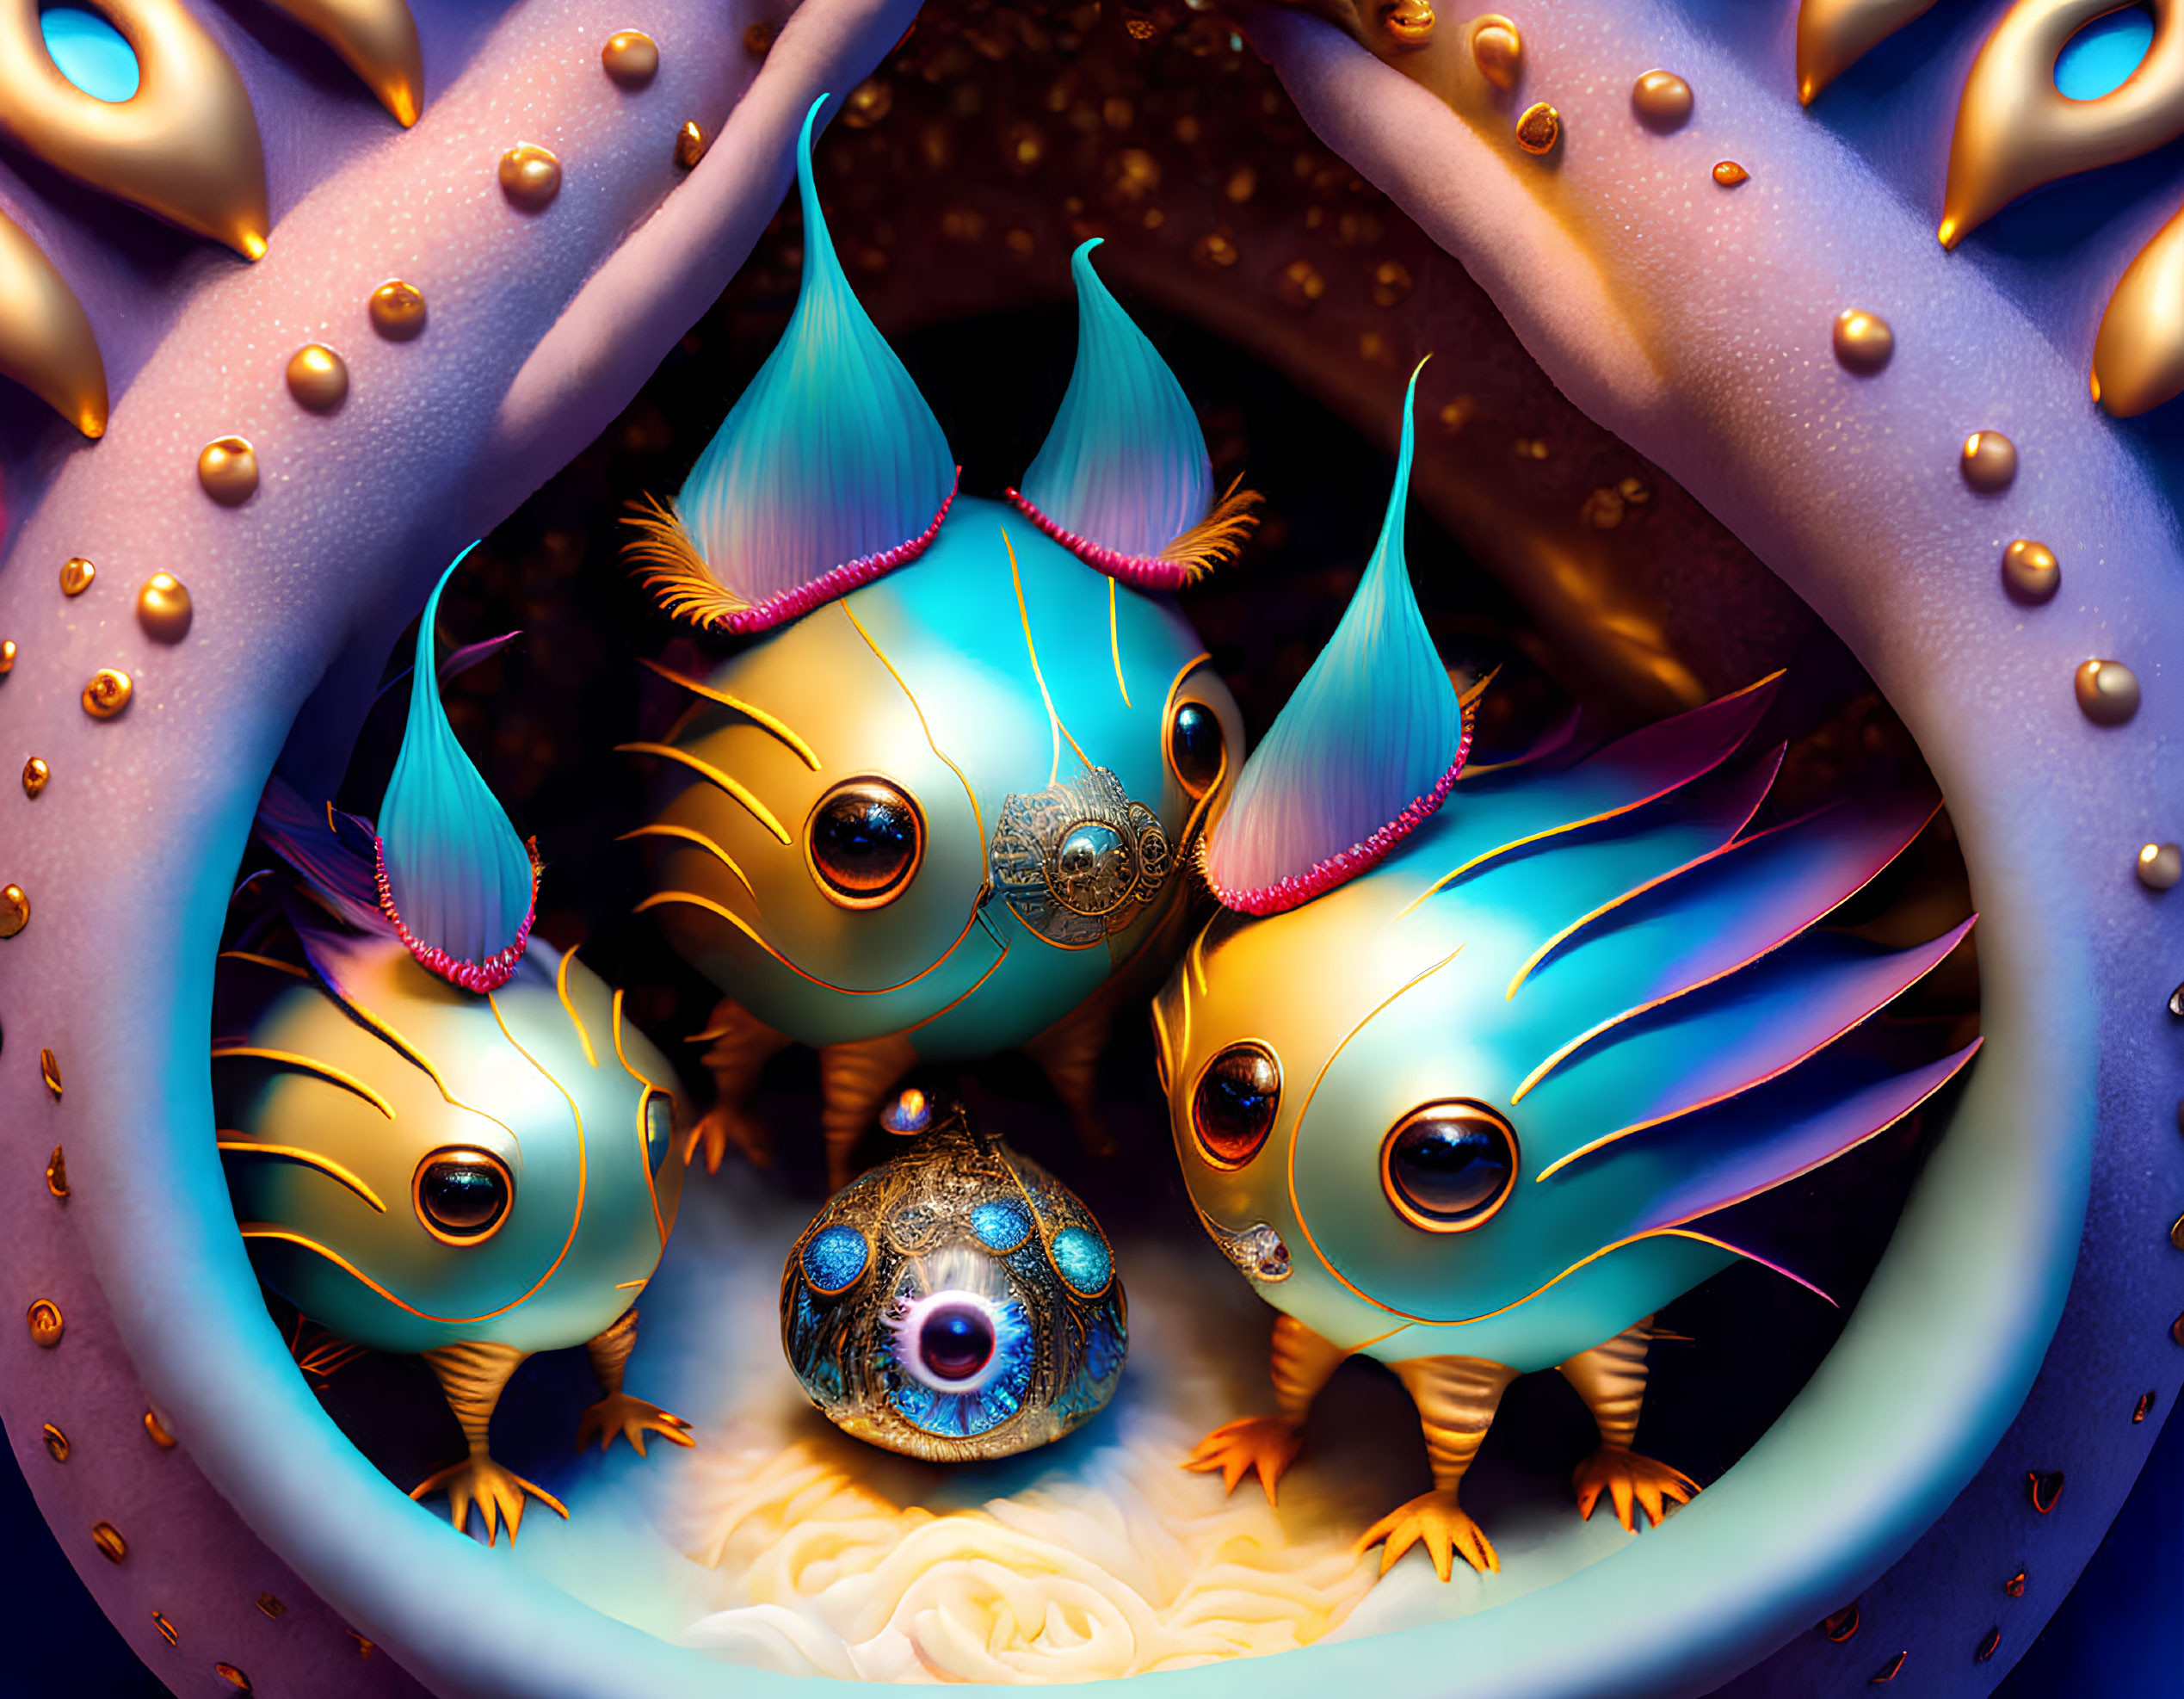 Colorful, ornate creatures in cozy setting with large eyes